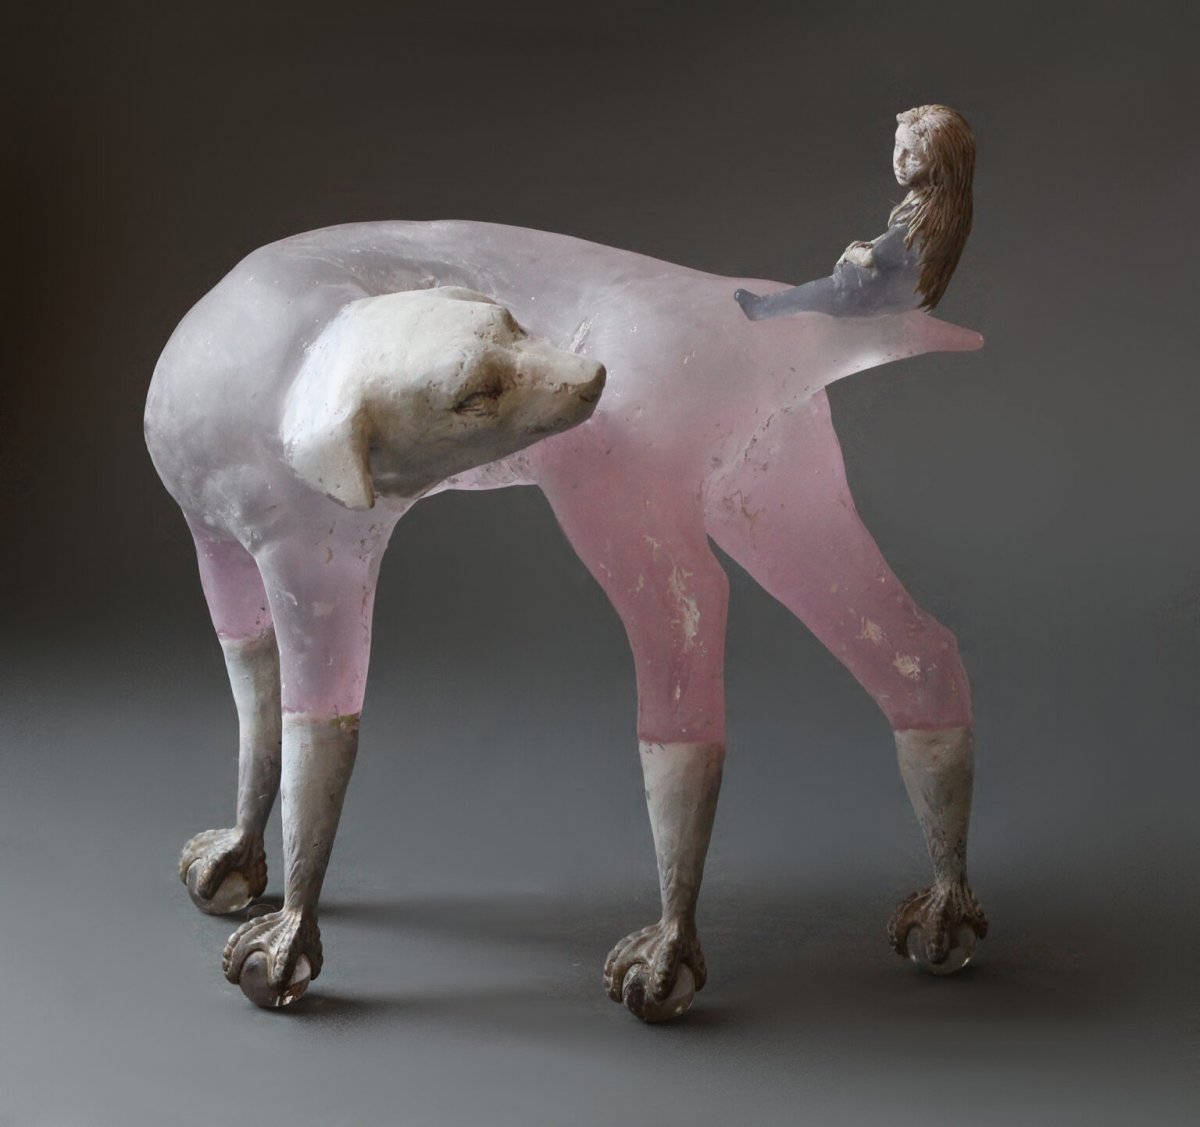 Ethereal Surrealist Sculptures Made Of Translucent Glass And Clay By Christina Bothwell 4